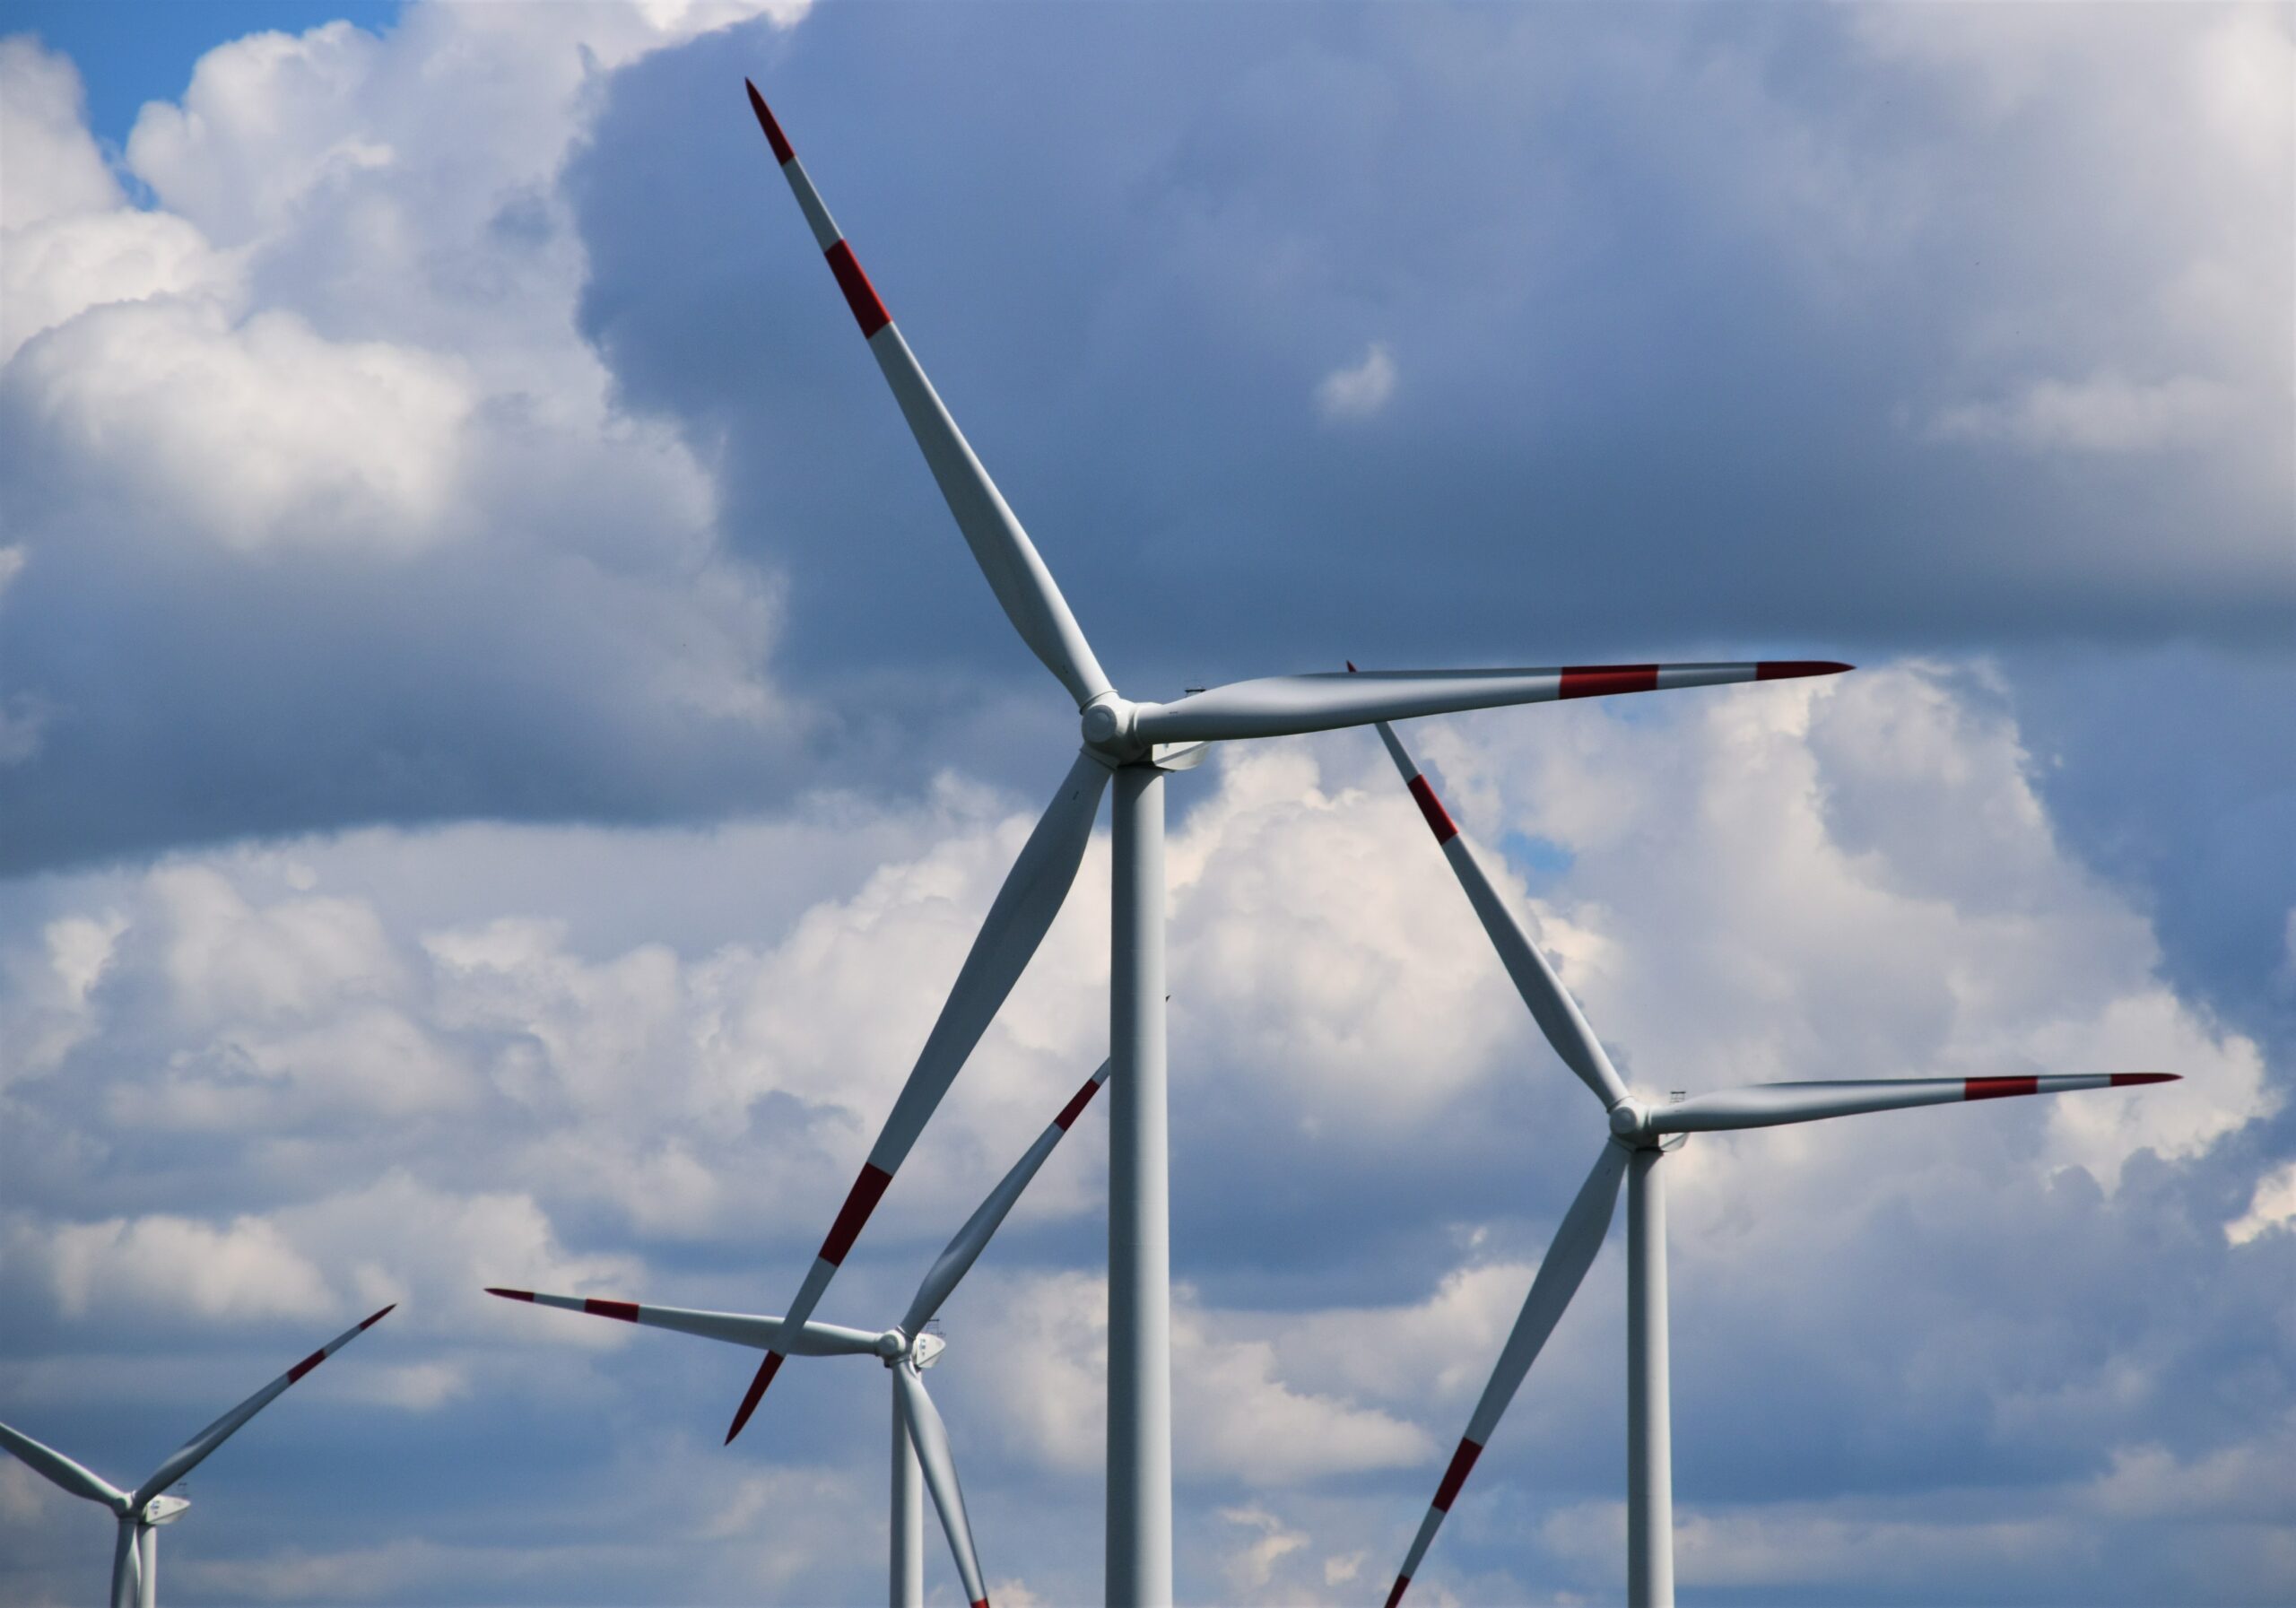 List of 3 wind farm developers active in Portugal